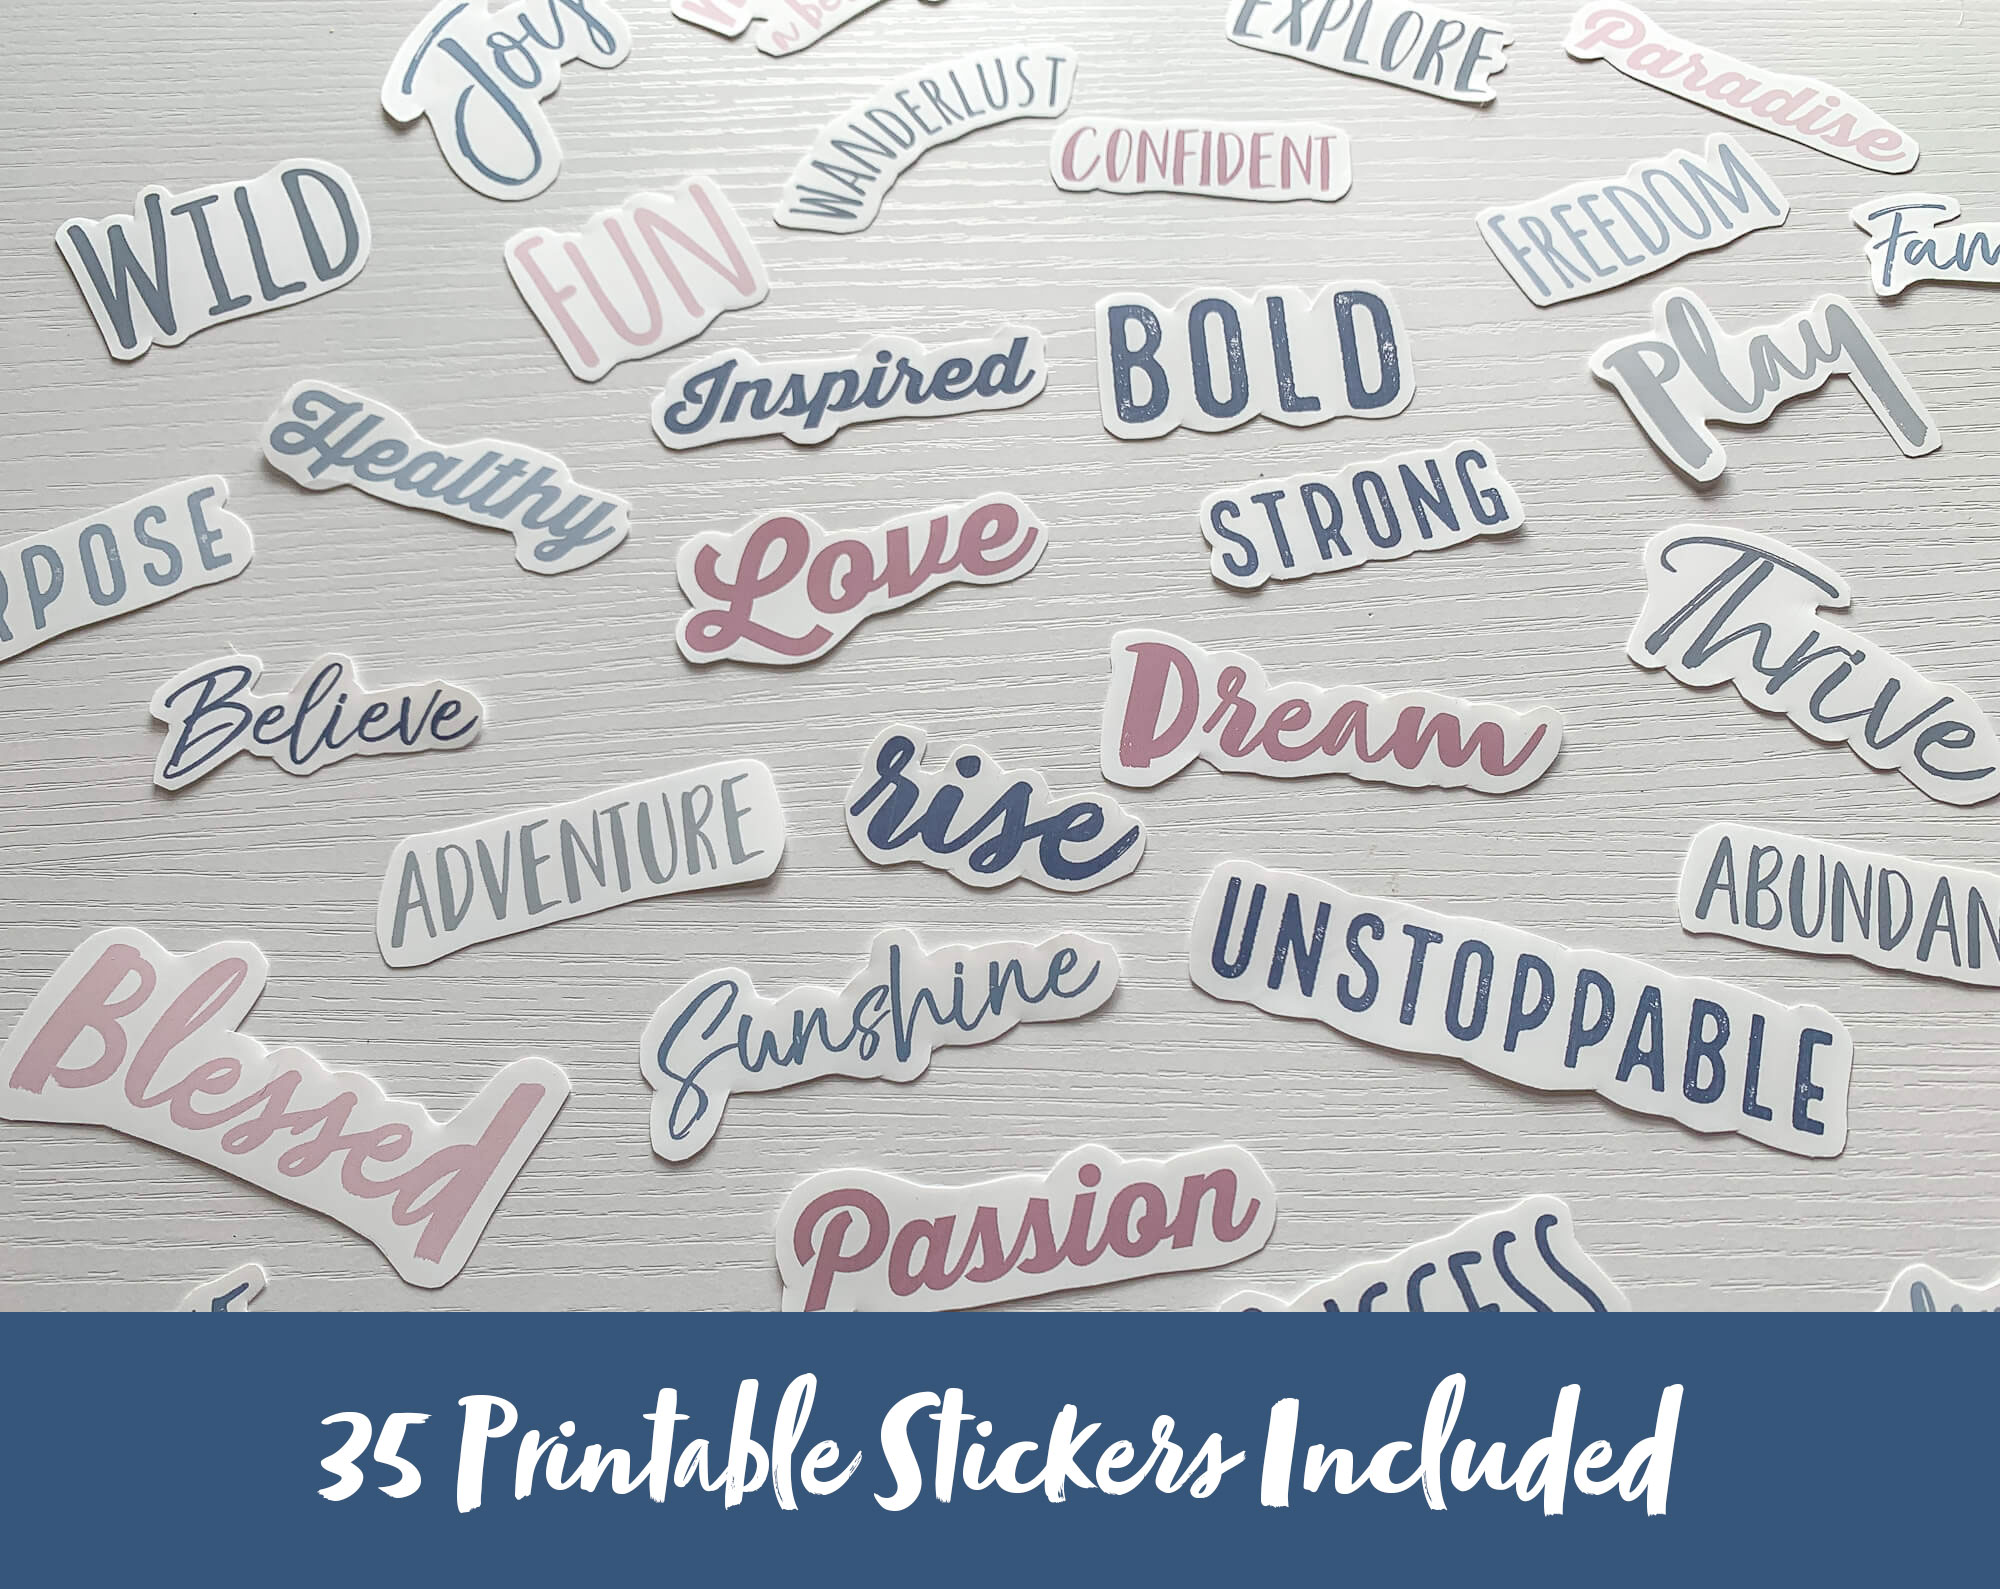 Vision Board Digital Sticker Design Graphic by Dreamwings